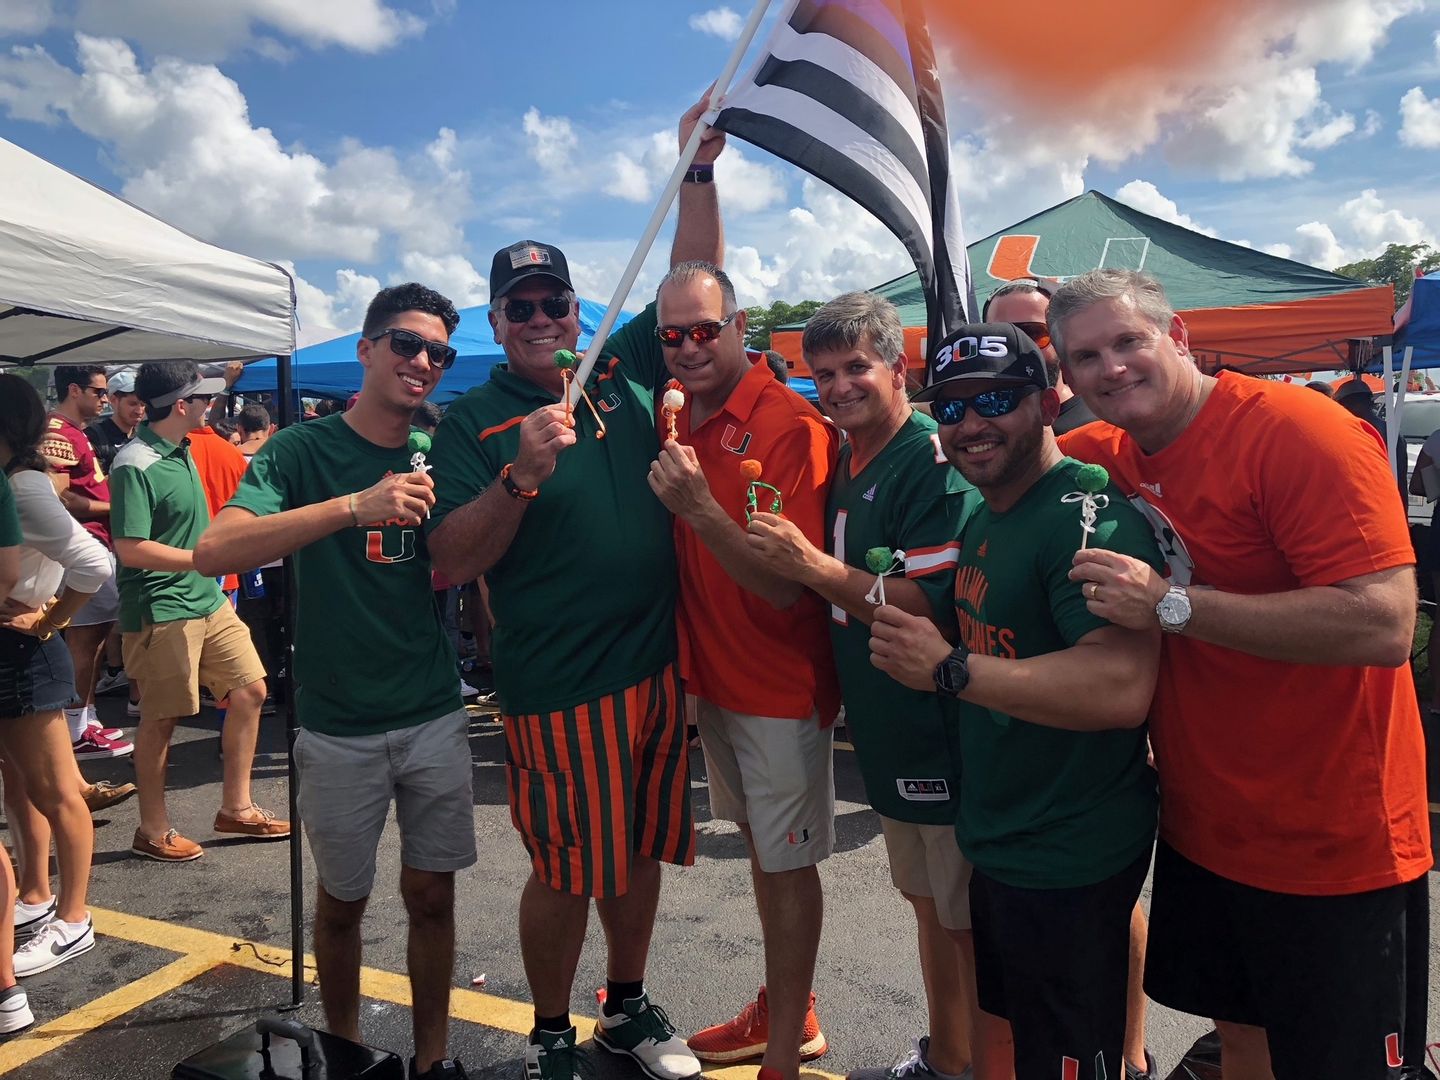 Seasoned Canes: Fans Share Their Stories